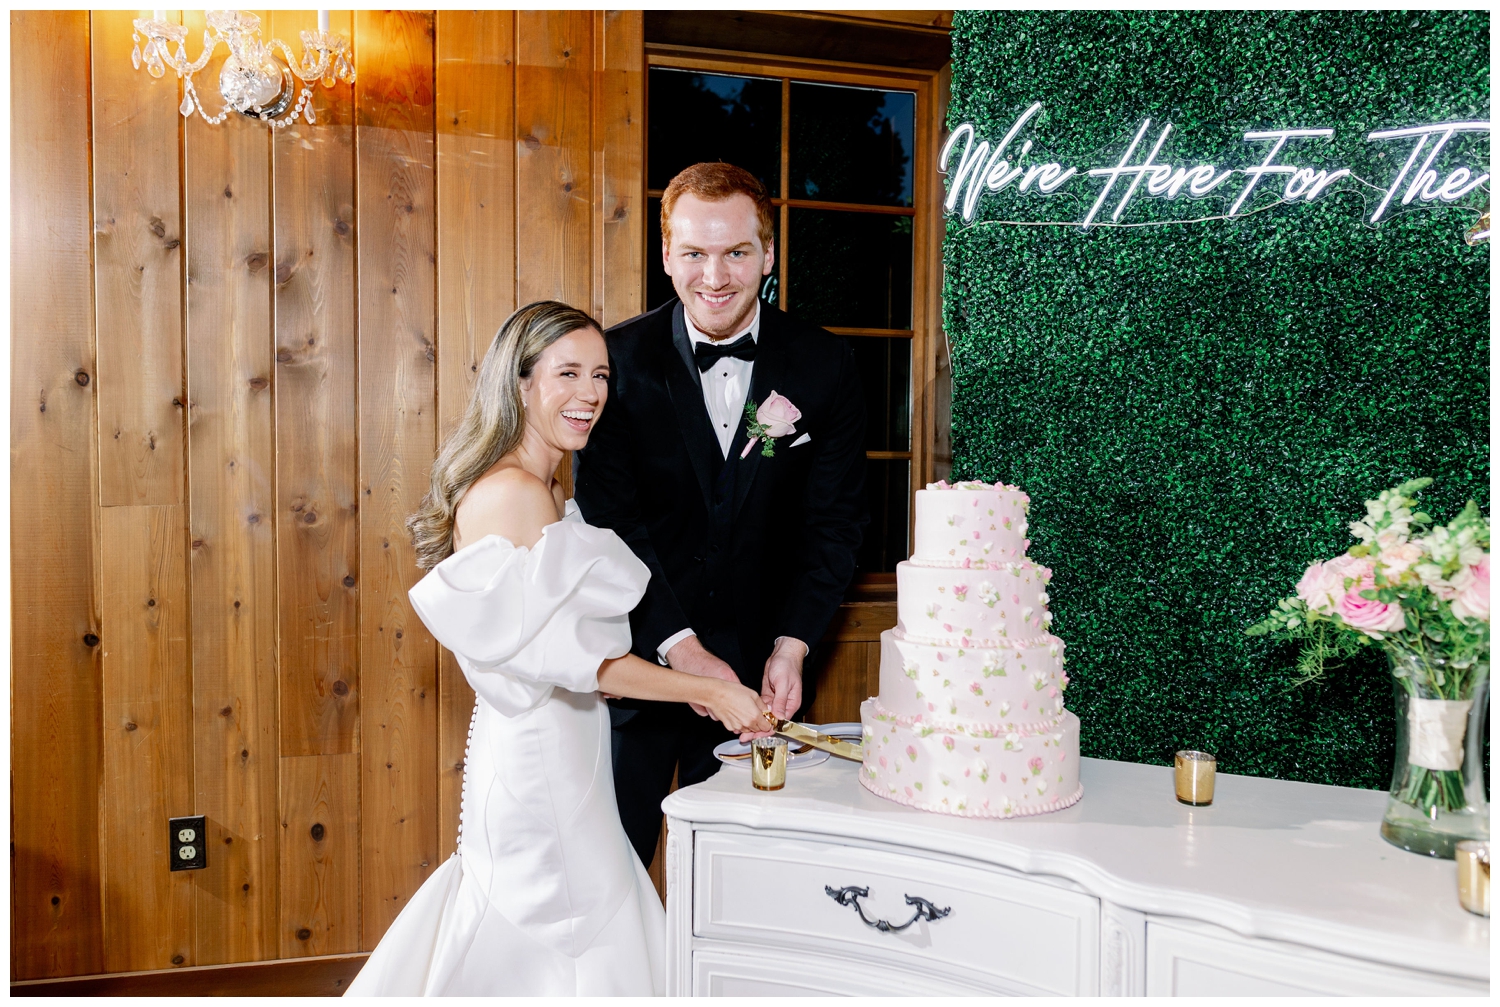 bride and groom cutting cake inside the Carriage House wedding reception space